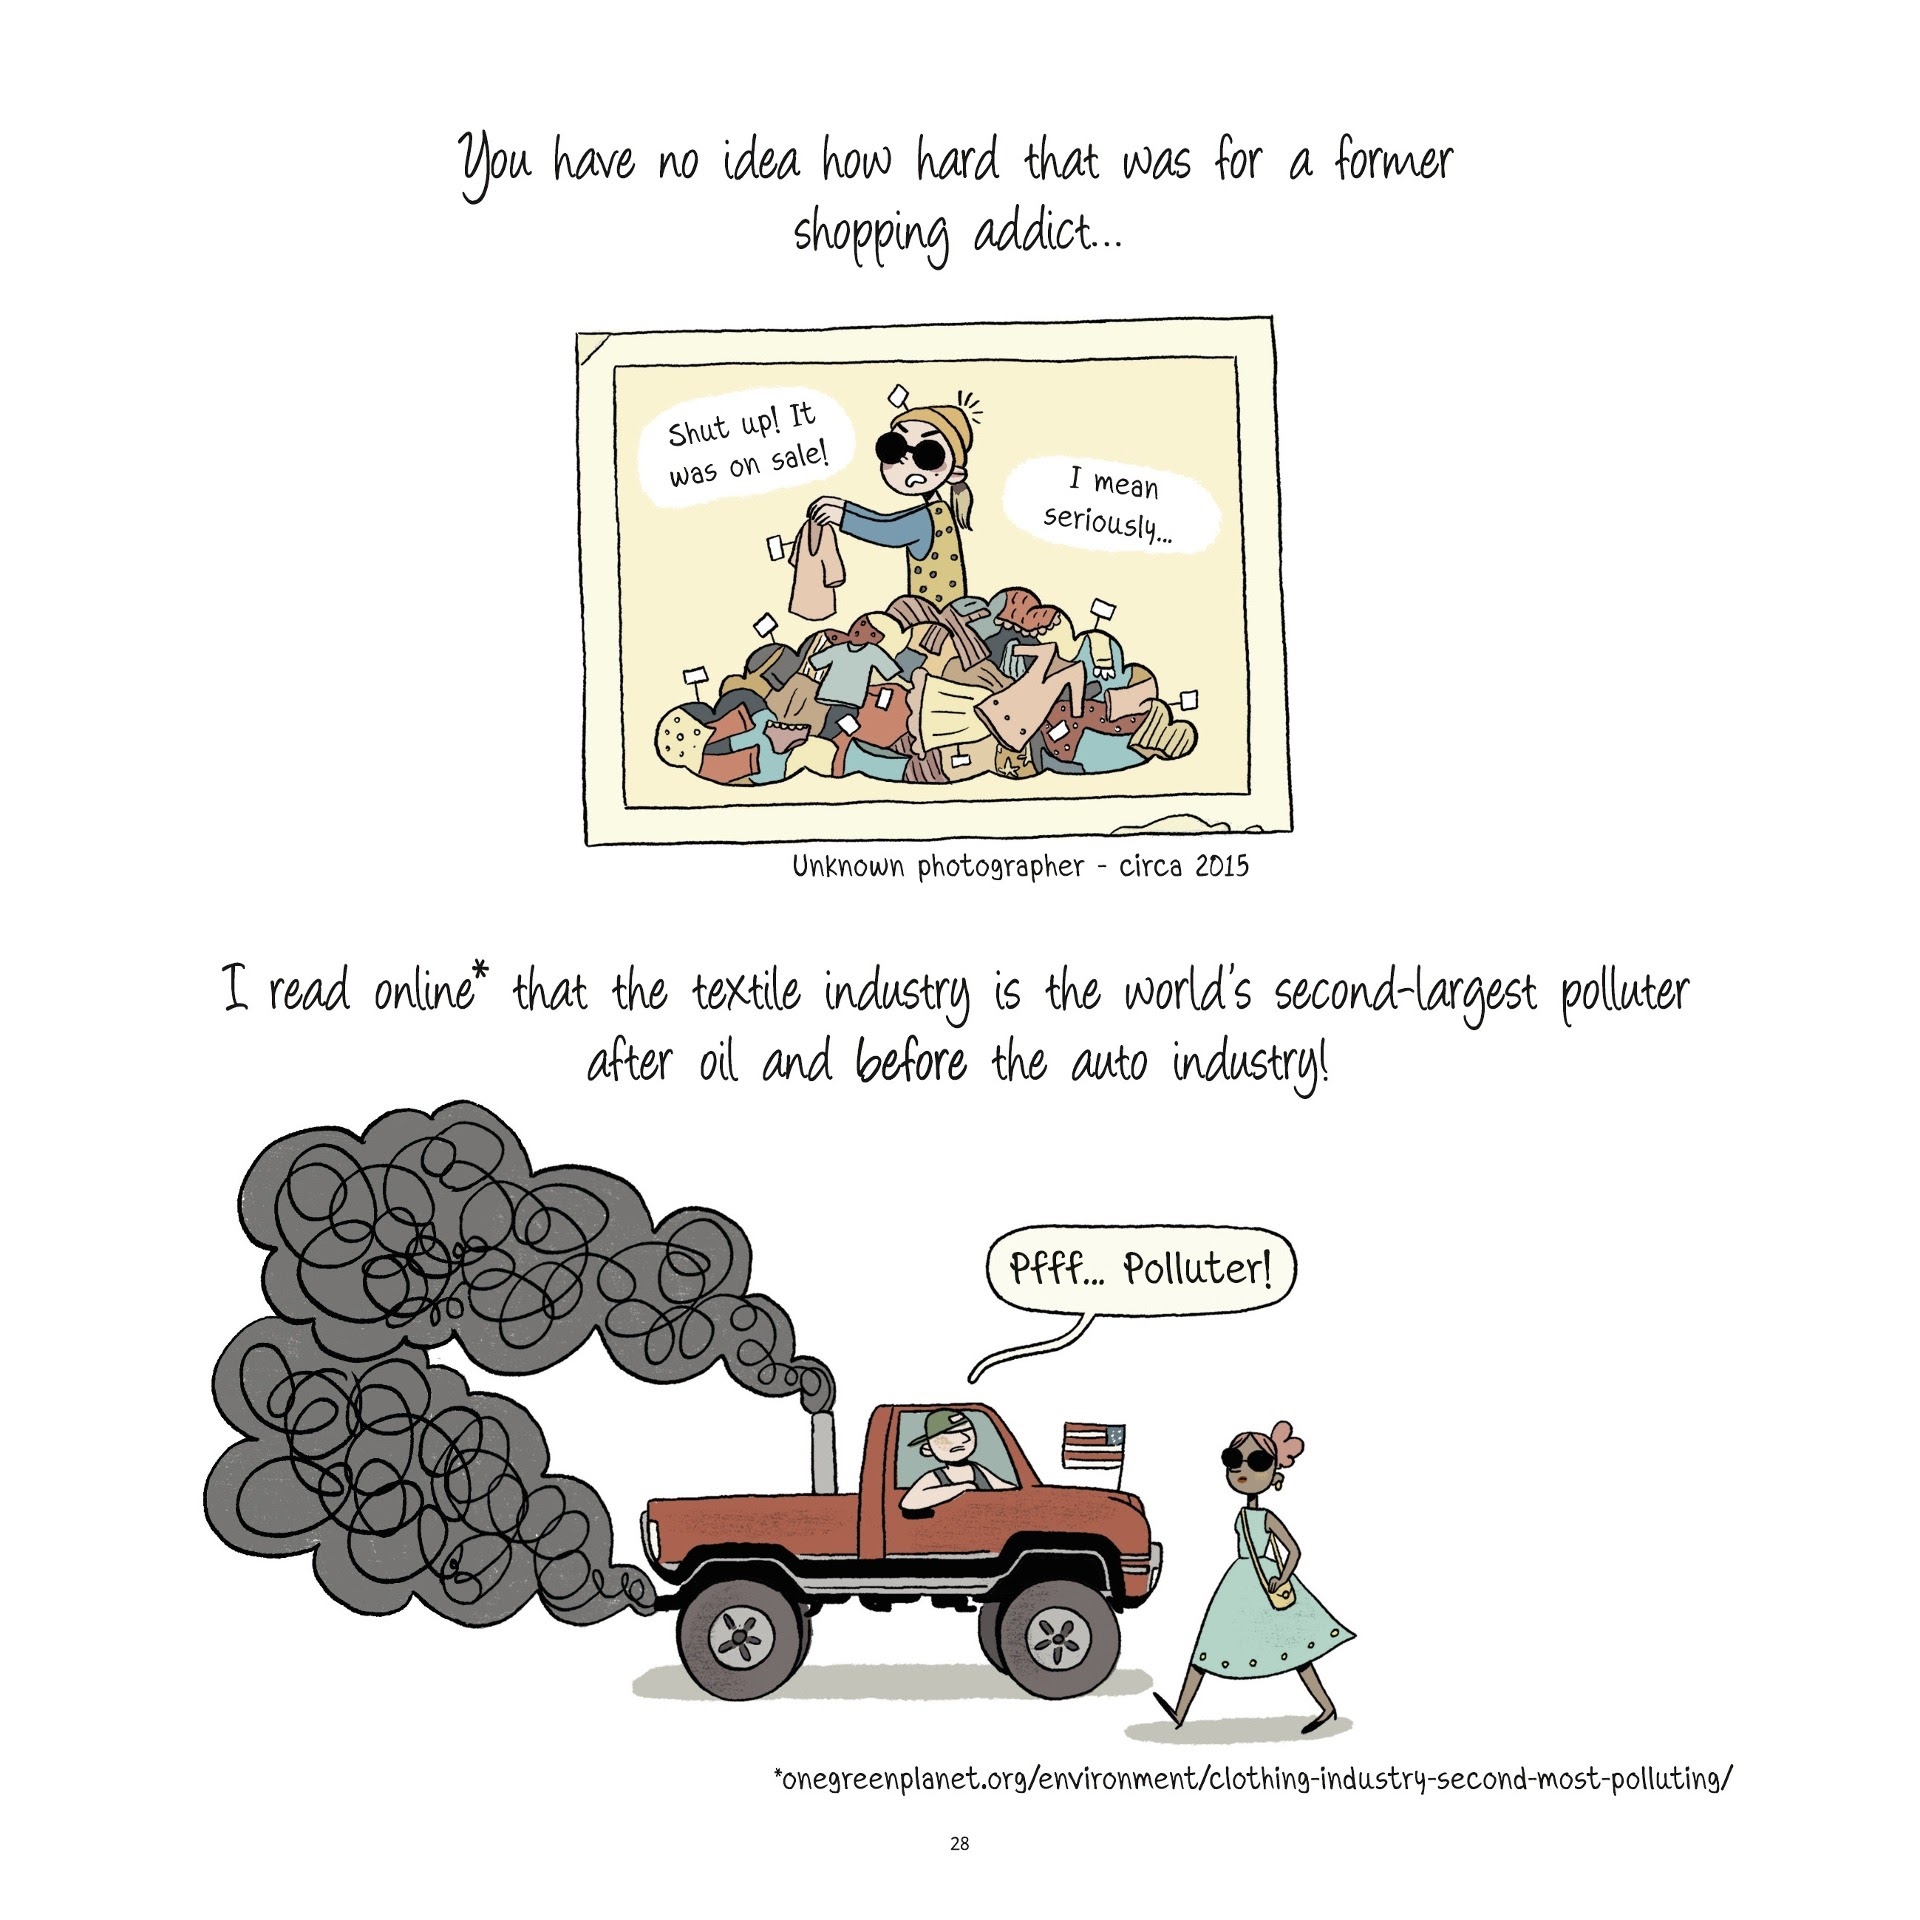 Read online Going Green: Giving It (Almost) My All for the Planet comic -  Issue # TPB 1 - 24